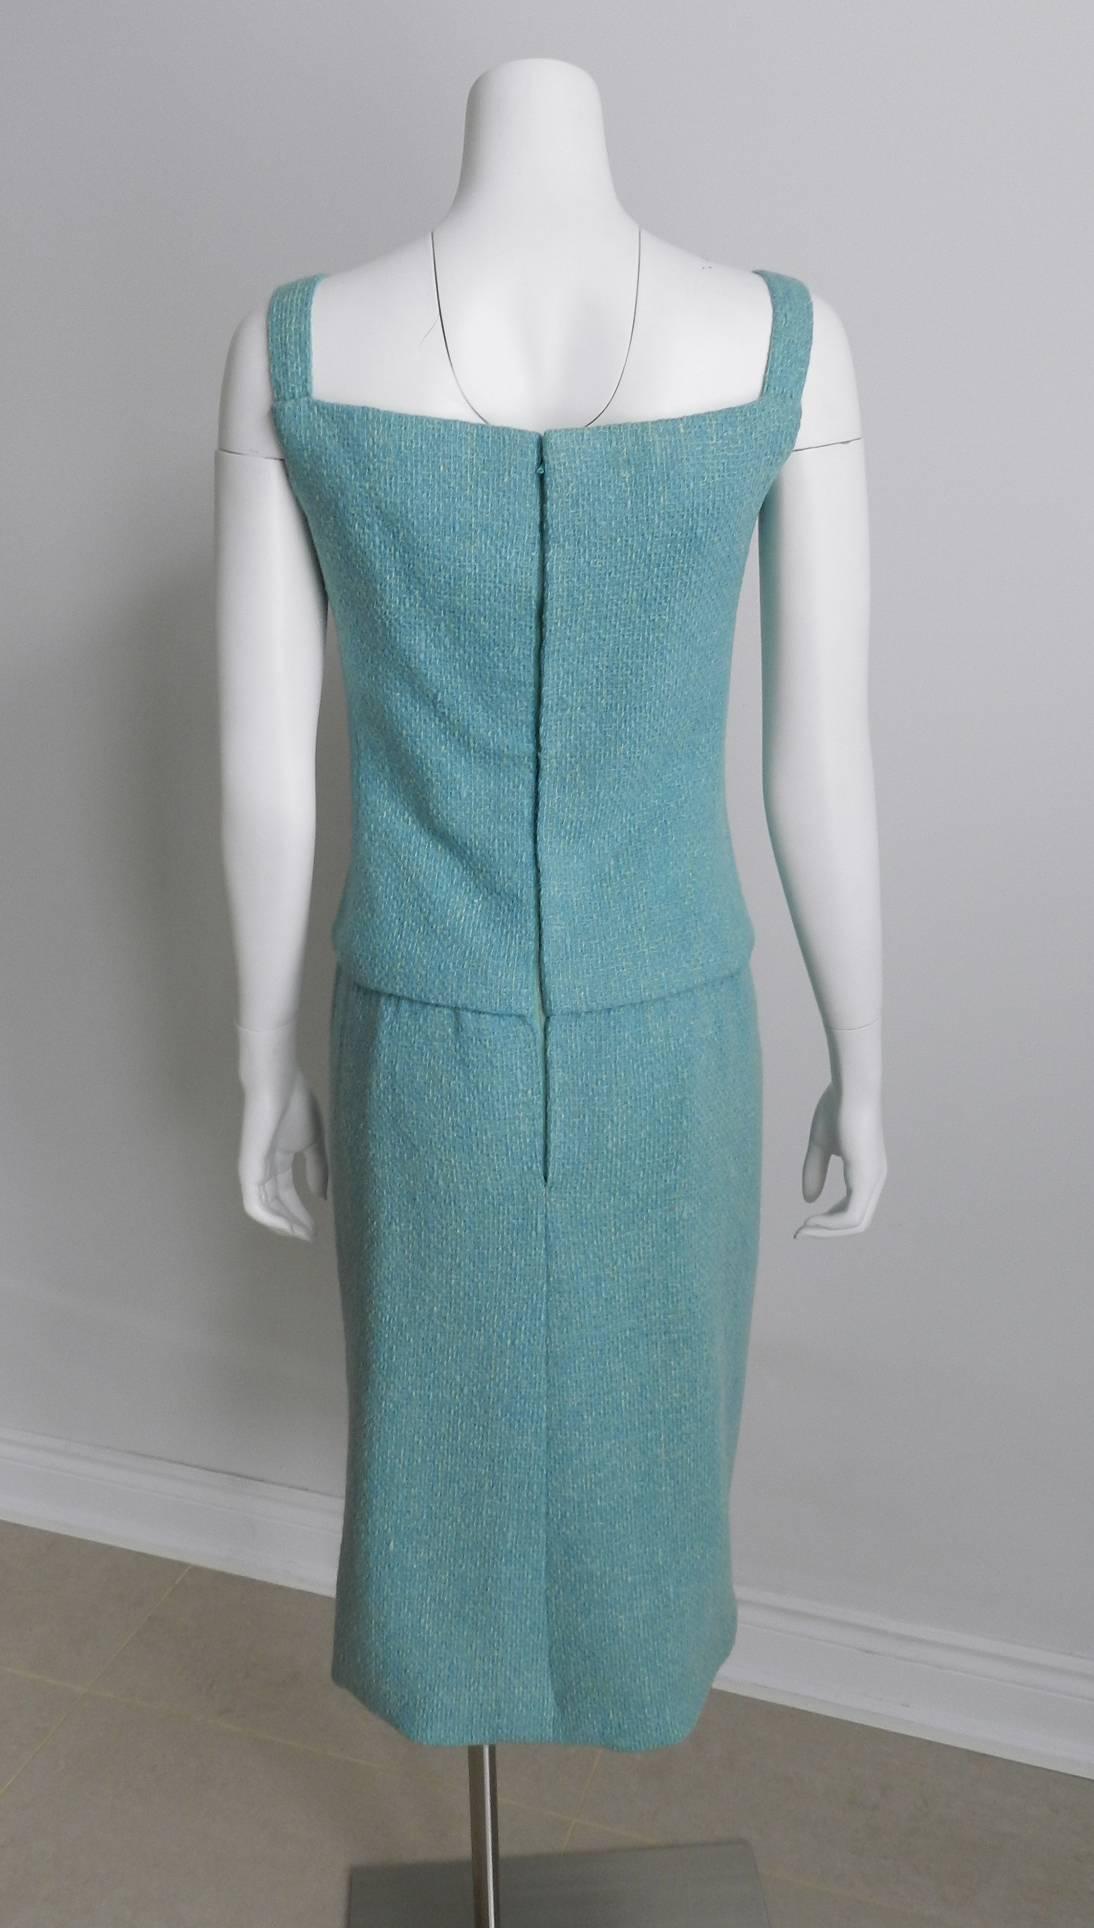 Christian Dior by Yves Saint Laurent 1960 Blue Dress and Jacket Suit 2